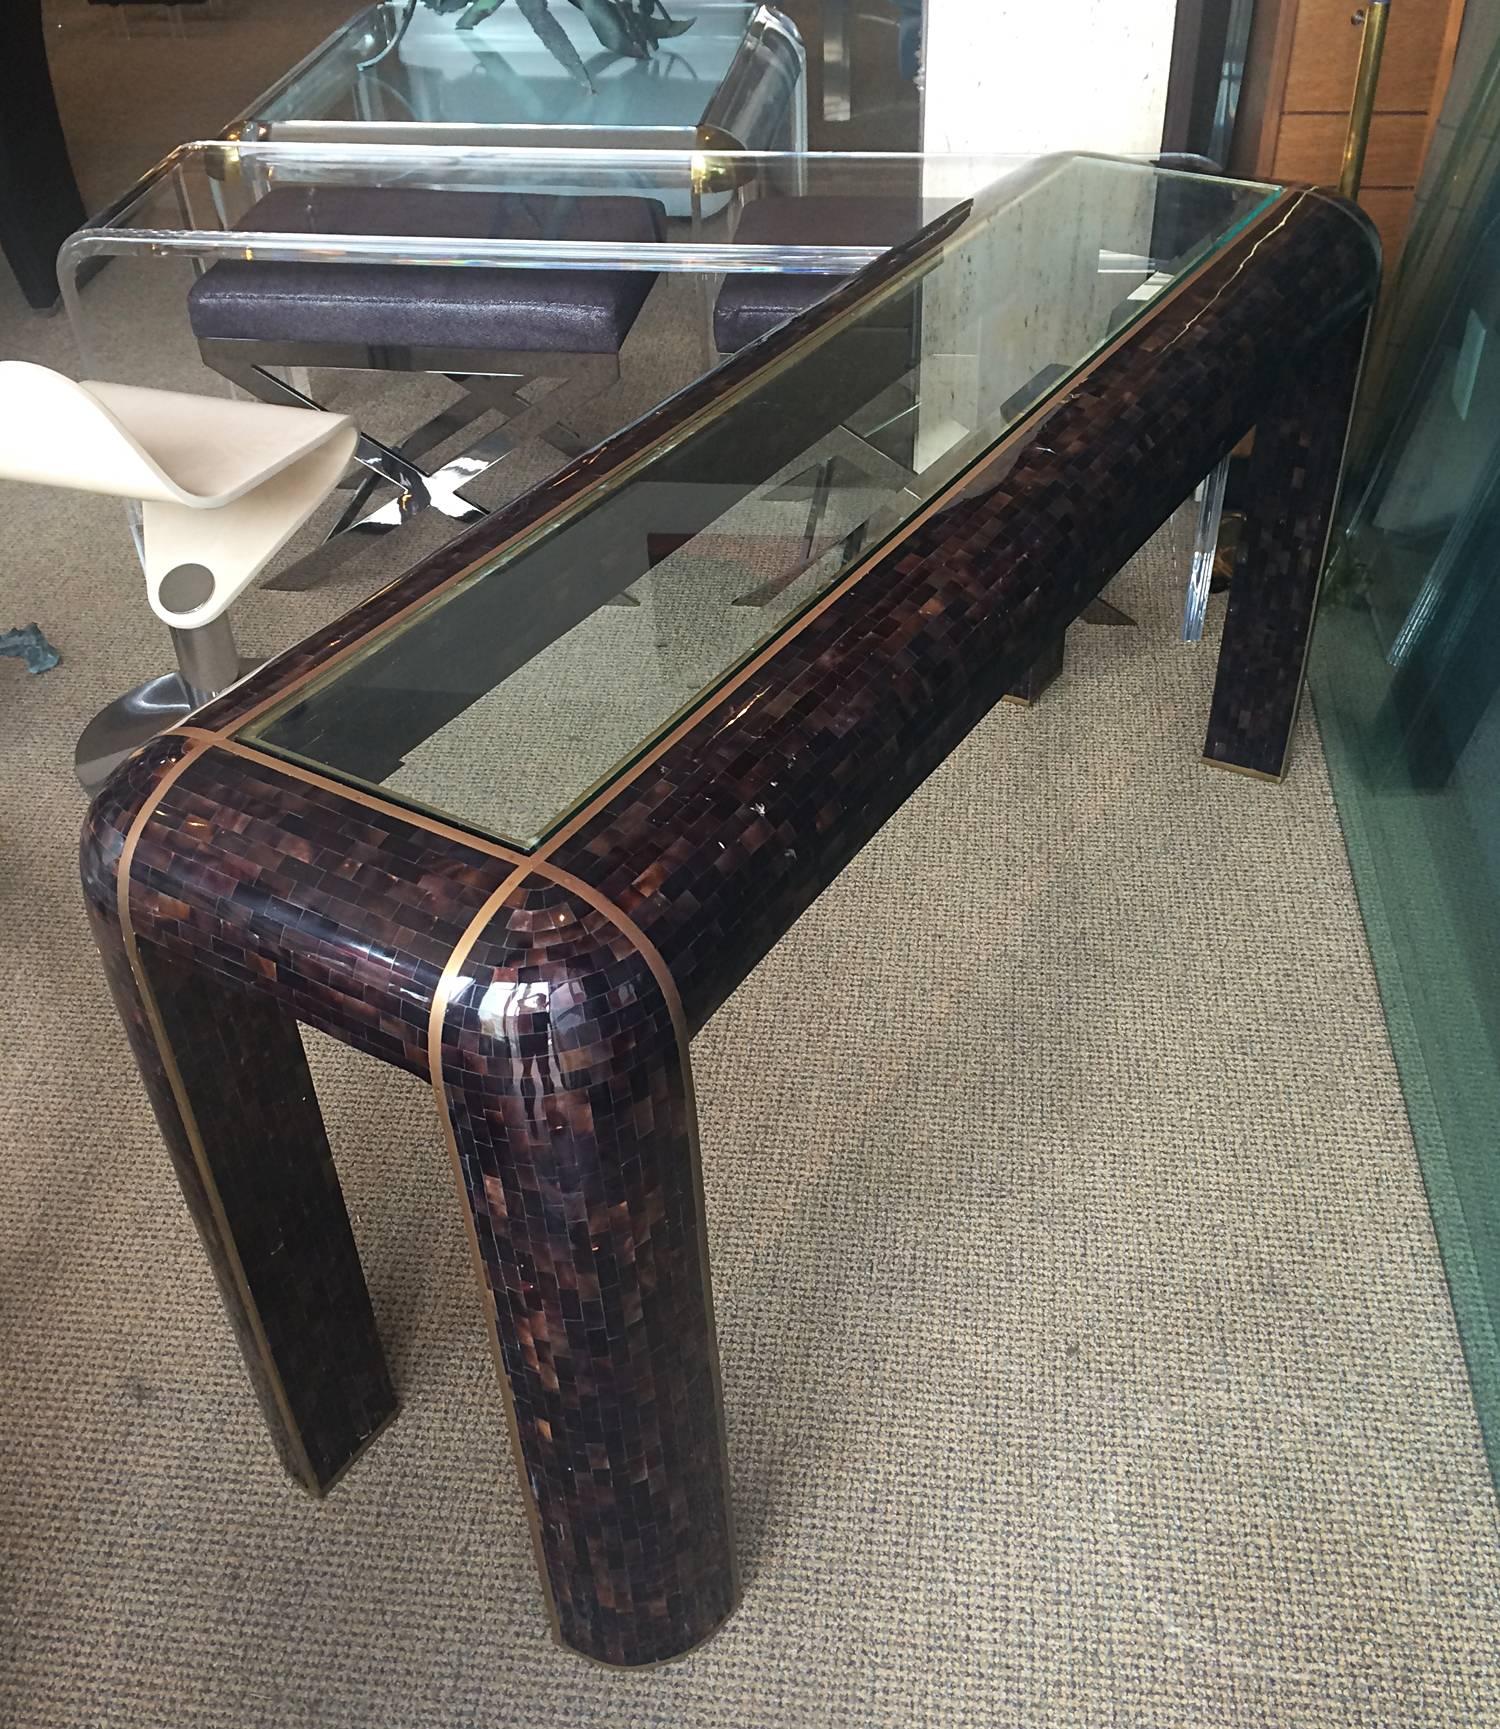 Stunning and unique sofa/console table made out of horn in the tessellated pattern with brass inlaid and glass top.
The table is very heavy and very sturdy, the brass has a beautiful aged patina and the horn material is in very good condition.
The